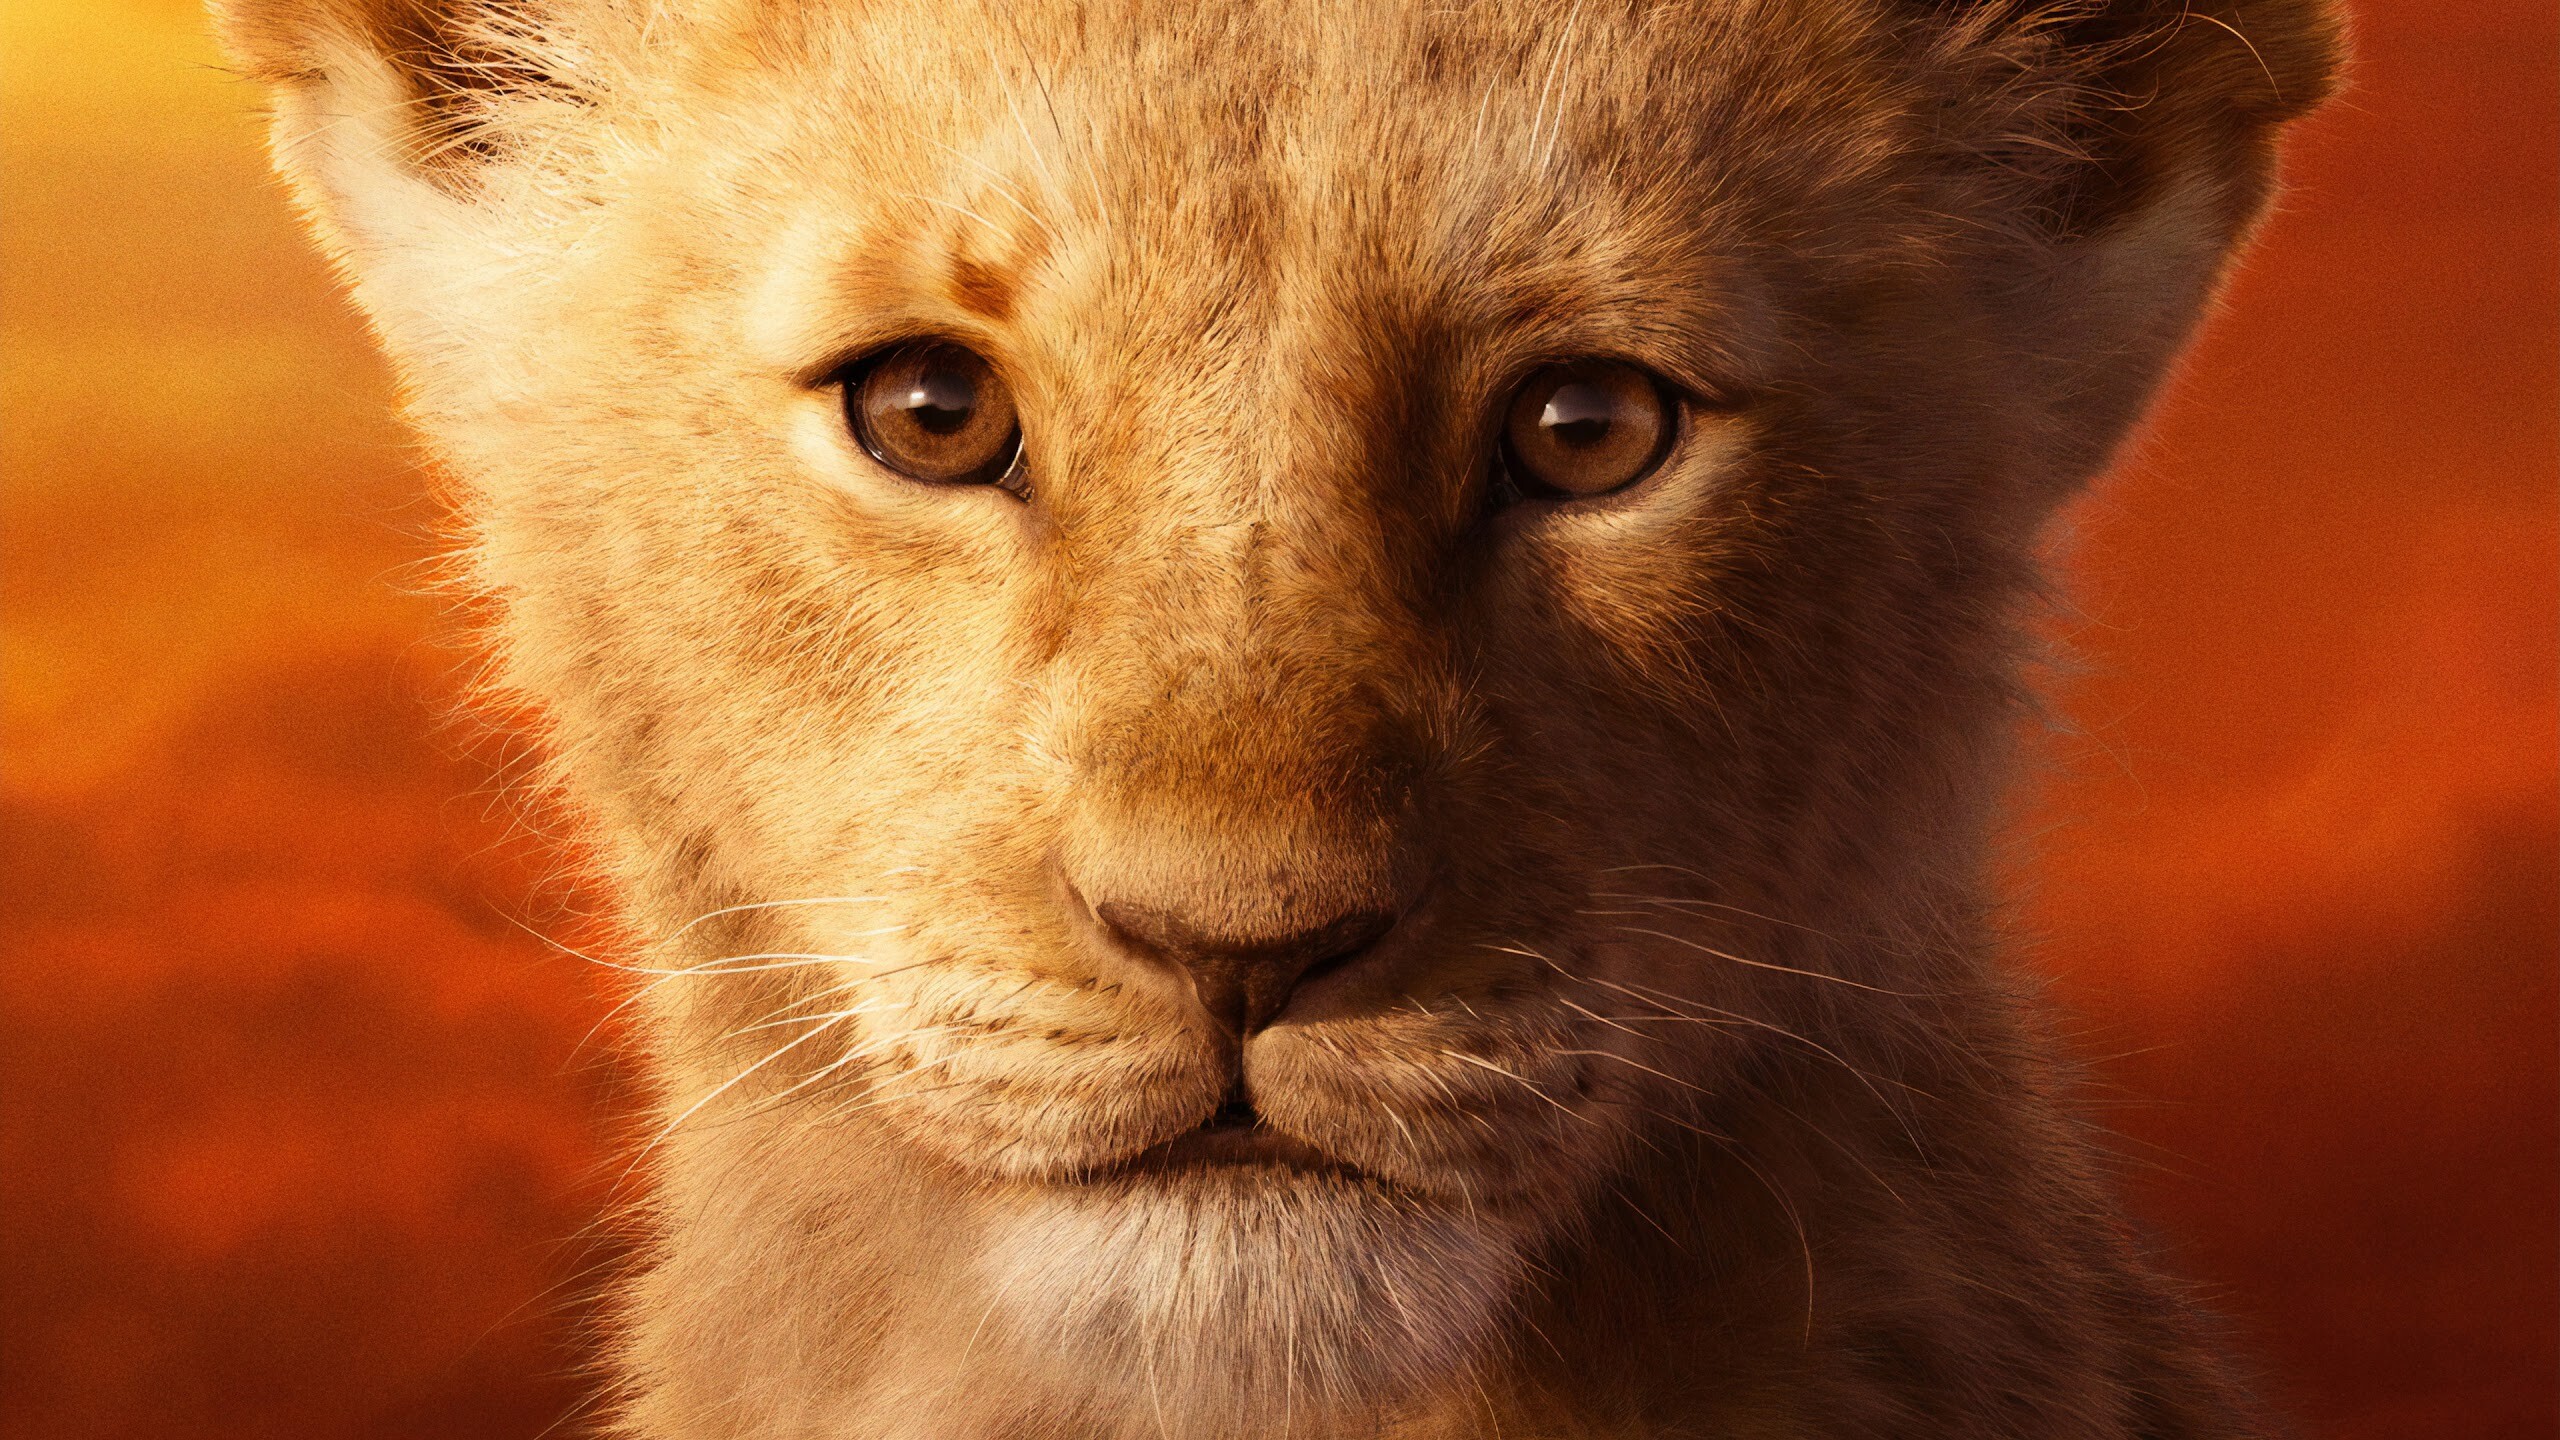 The Lion King: Simba, Destined to be the ruler of his pride. 2560x1440 HD Wallpaper.